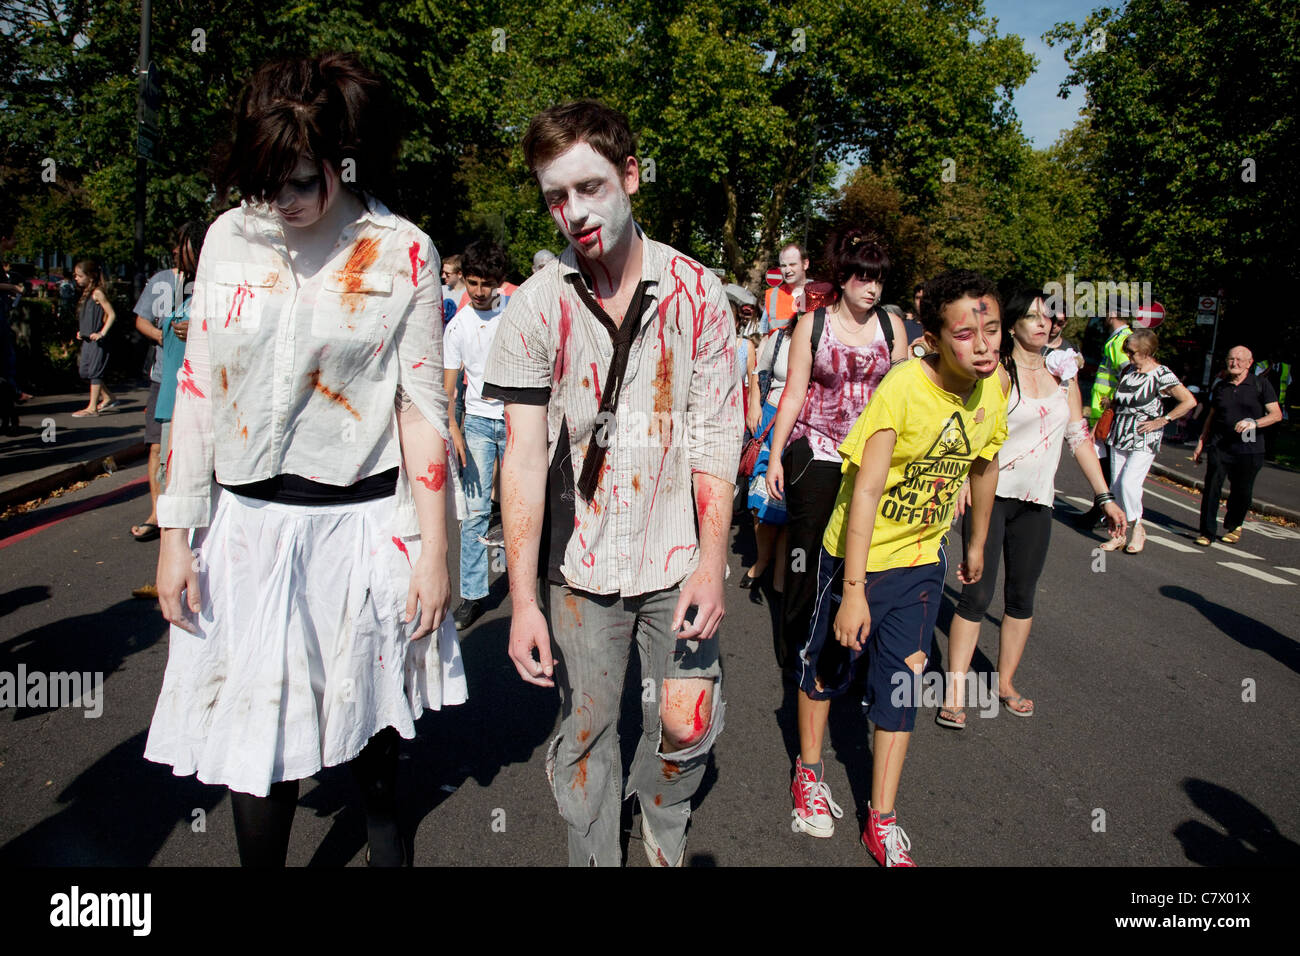 Stoke Newington Zombie protest. Demonstrating against the planned opening of a large Sainsbury's supermarket. Stock Photo